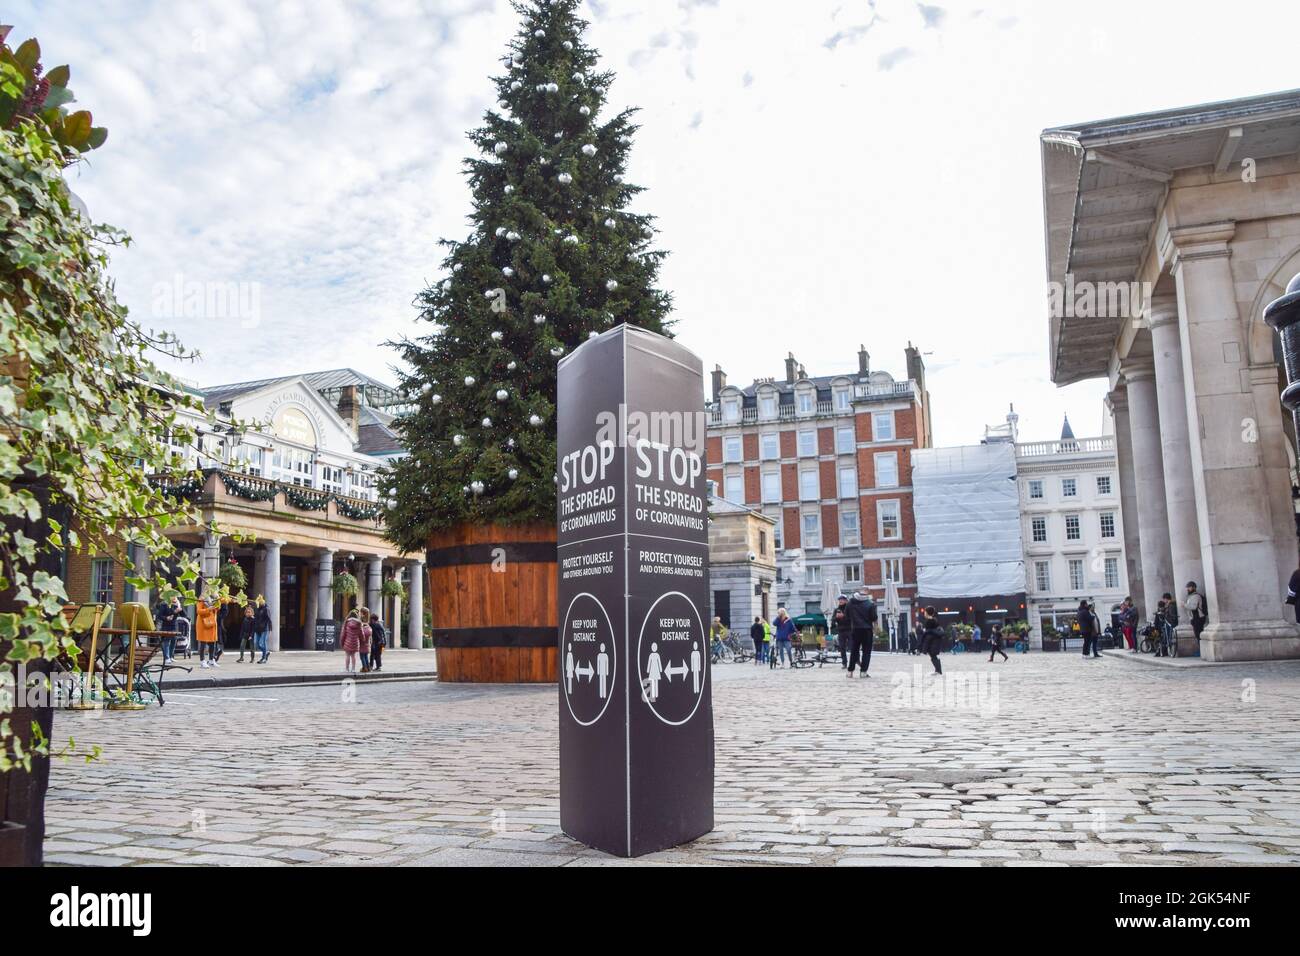 'Stop The Spread Of Coronavirus' sign next to the Christmas tree in Covent Garden. London, United Kingdom 22 November 2020. Stock Photo